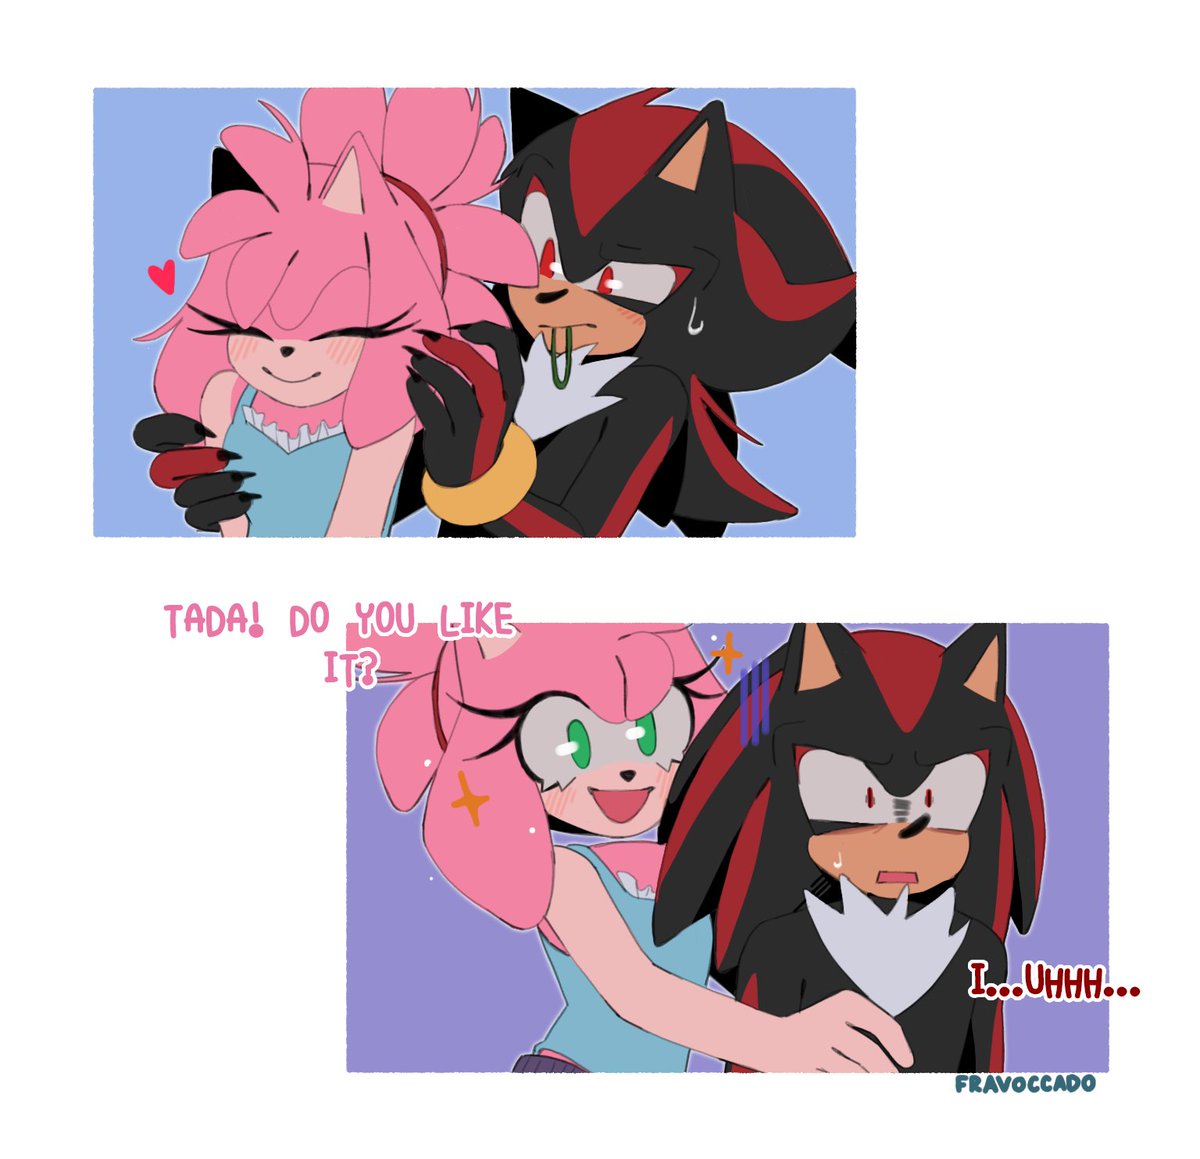 He looks like his first design lmao 😂
DAY 3 - Quill Care
#shadamy #ShadamyWeek2023 #shadamyweek #ShadowTheHedgehog #amyrose